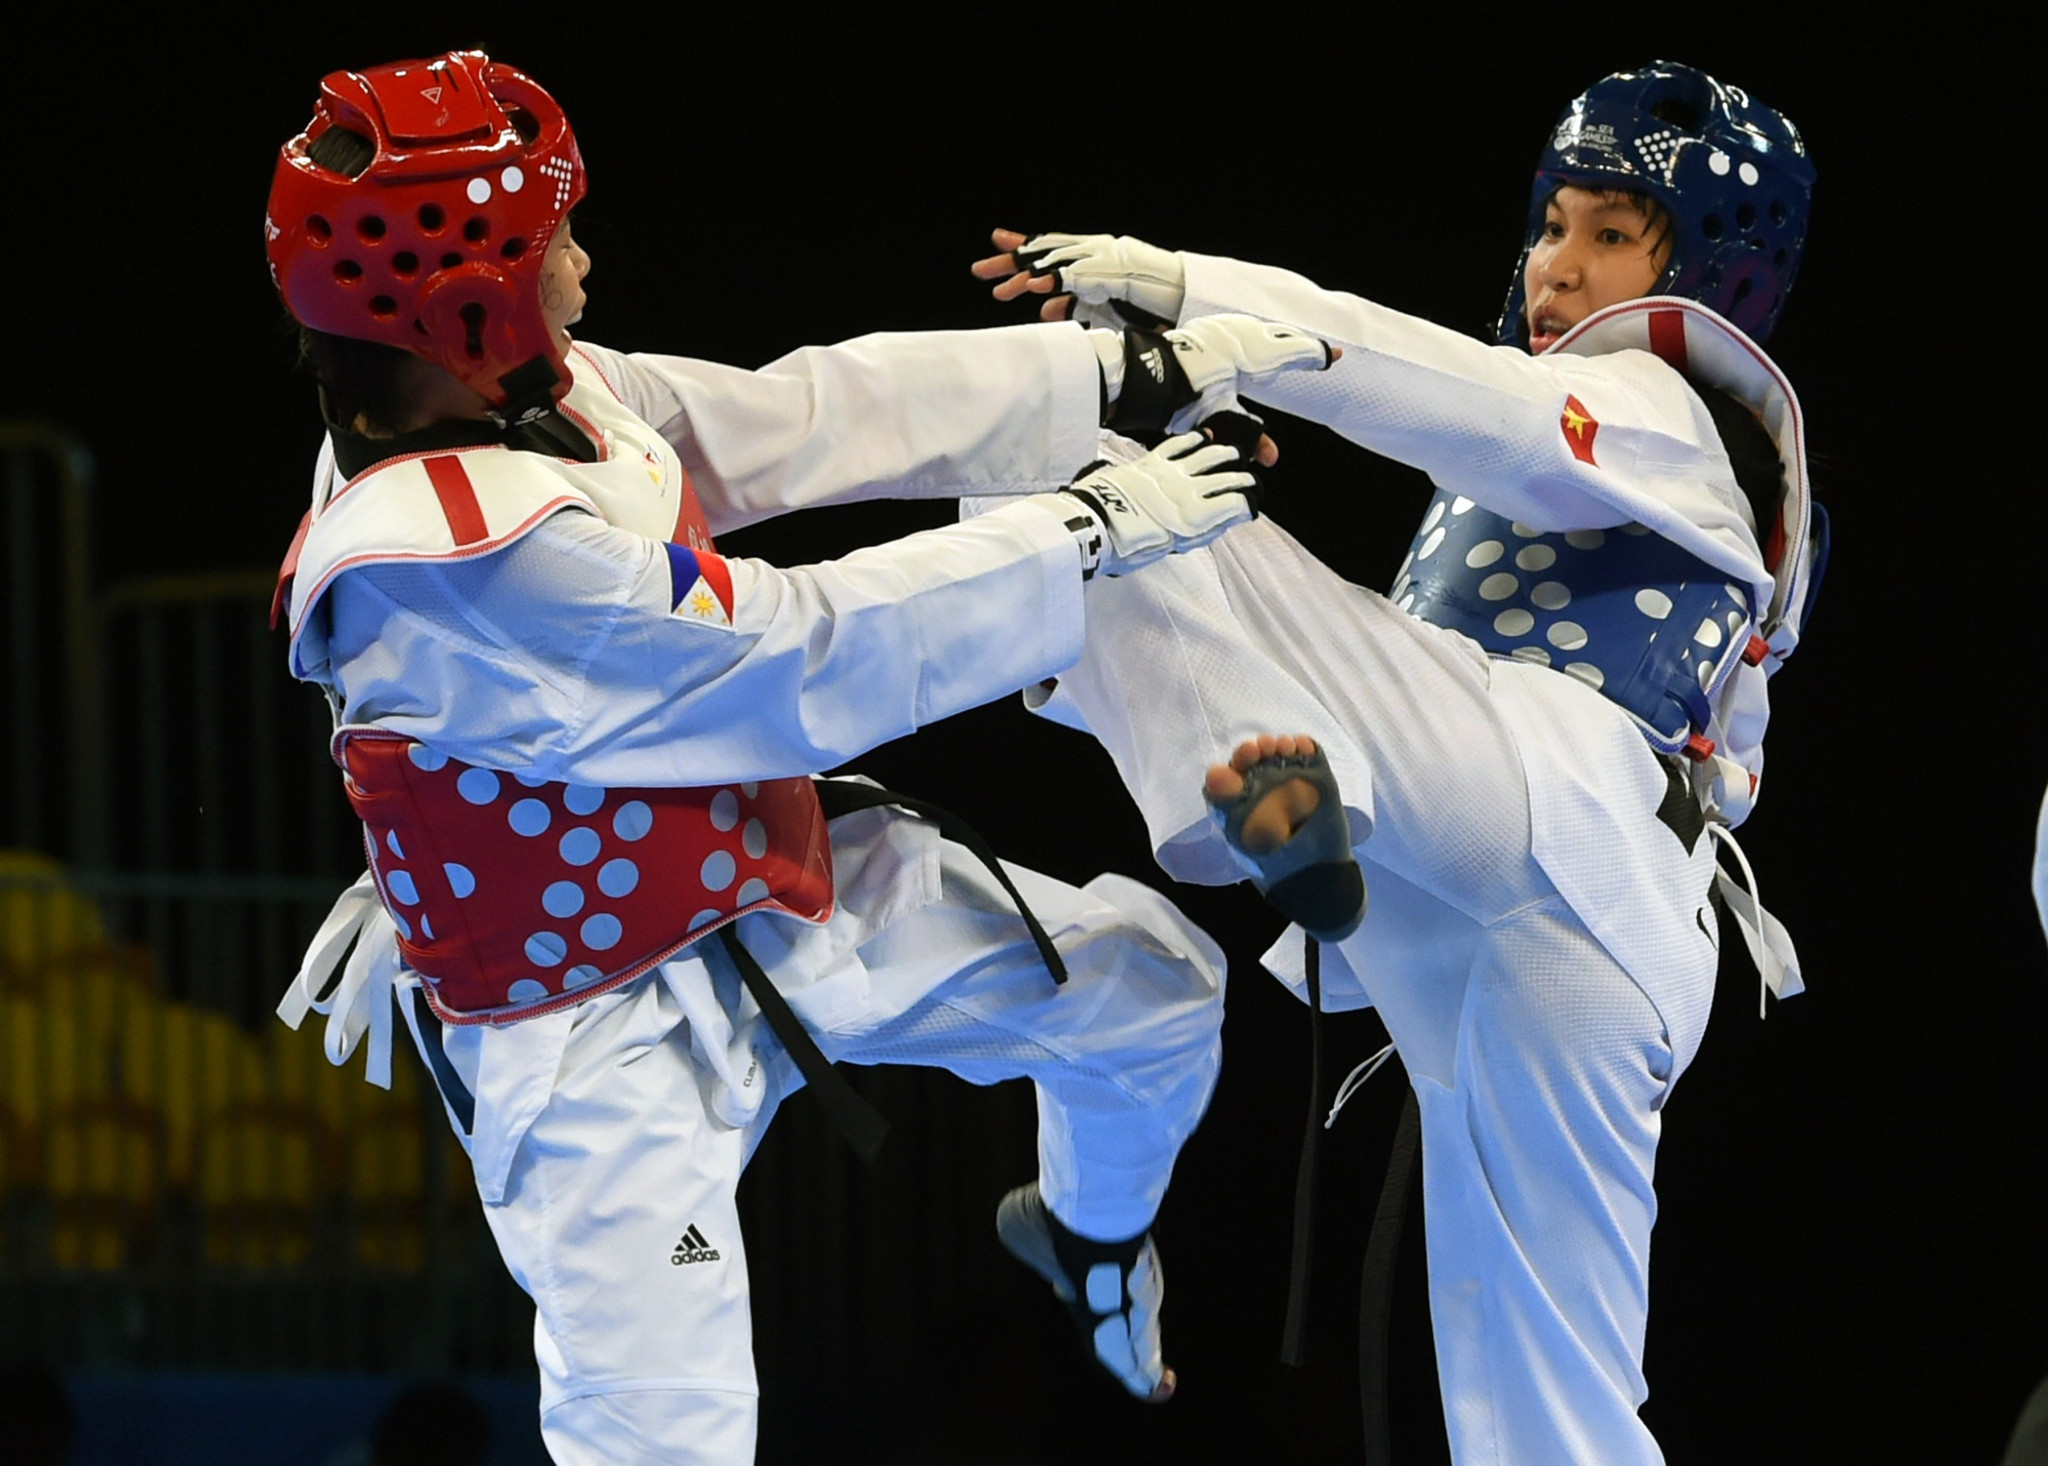 Trương Thị Kim Tuyến, right, heads into the Tokyo 2020 Olympics as Asian champion in the lightest category ©Getty Images